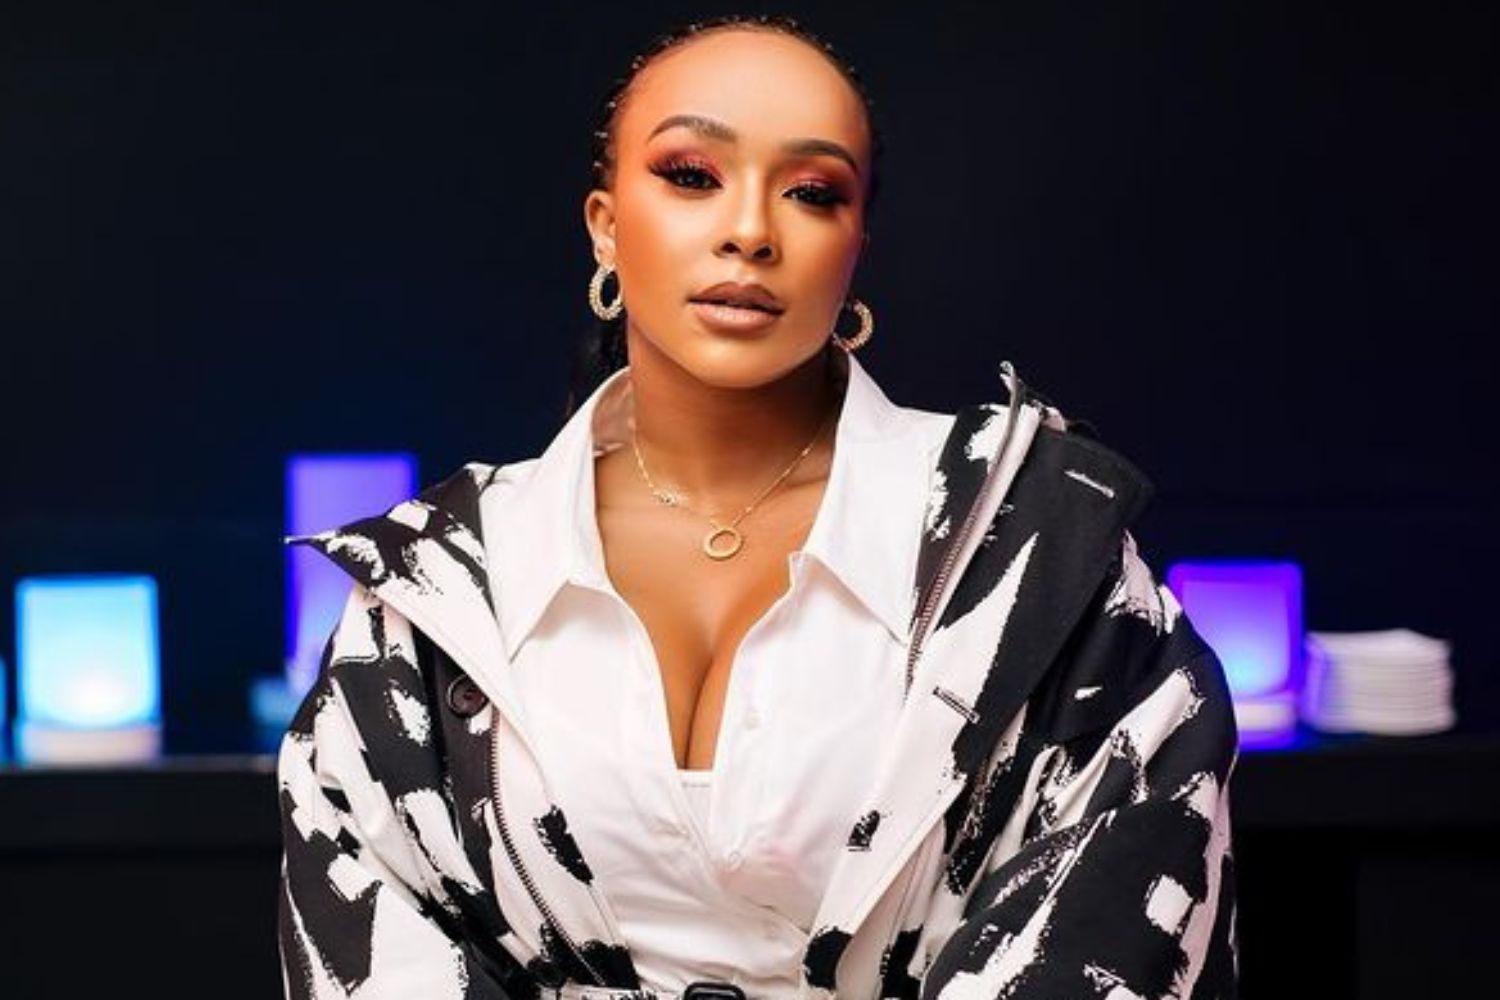 Boity Thulo's Surprise Announcement: South African Rapper Prepares for First Church Visit in 7 Years